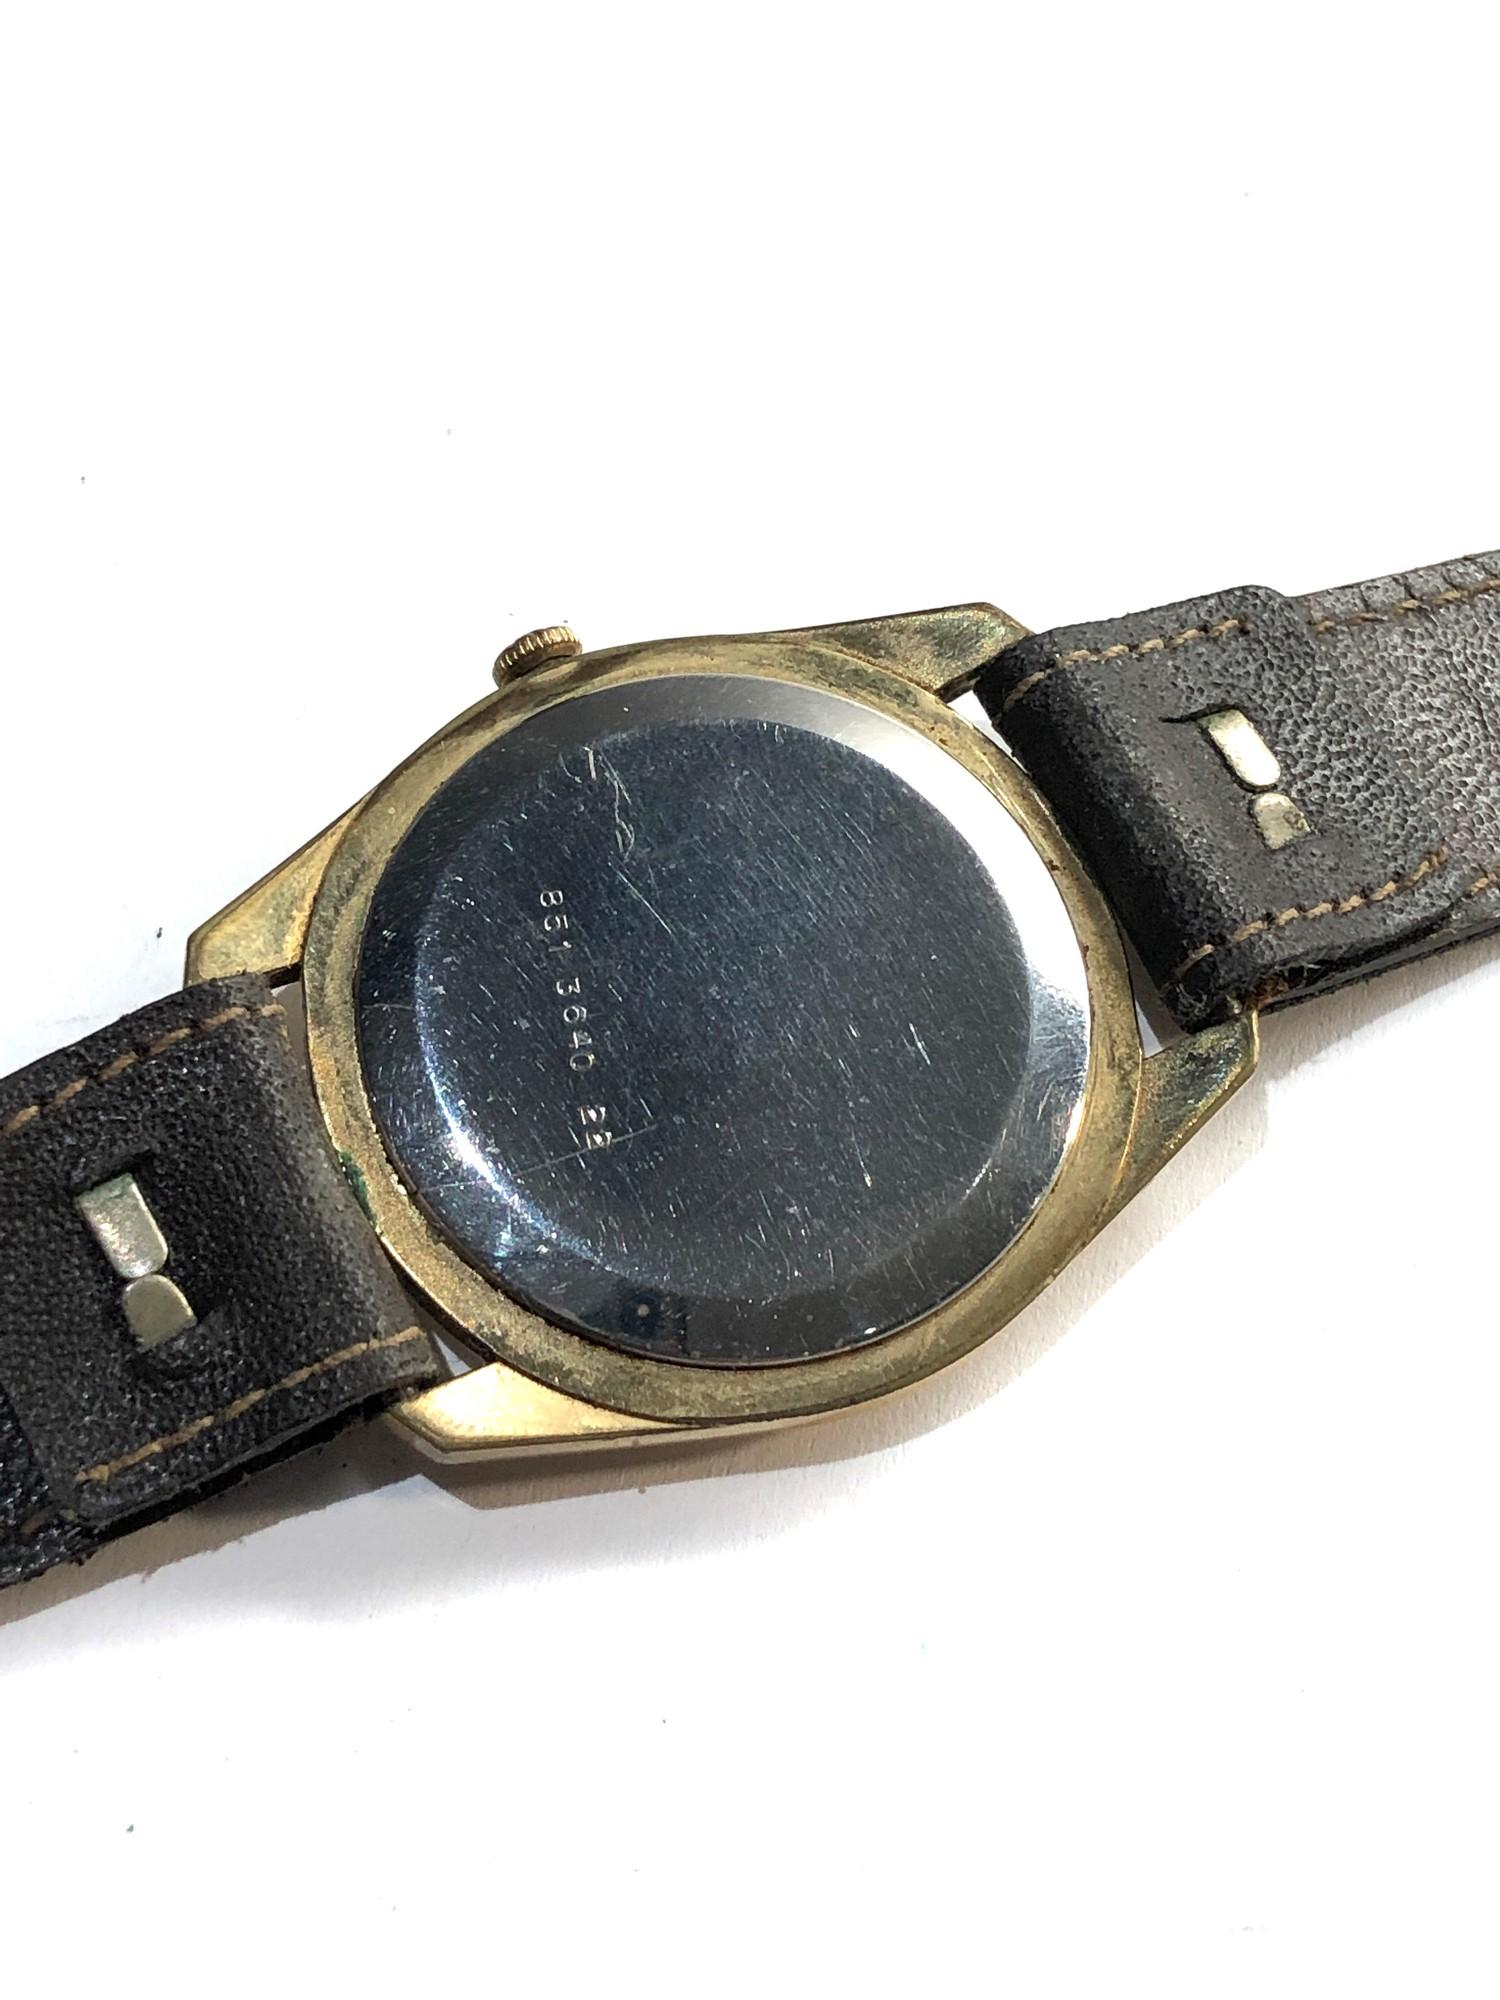 Vintage Certina Club 2000 Gents mechanical wristwatch in working order but no warranty given - Image 3 of 3